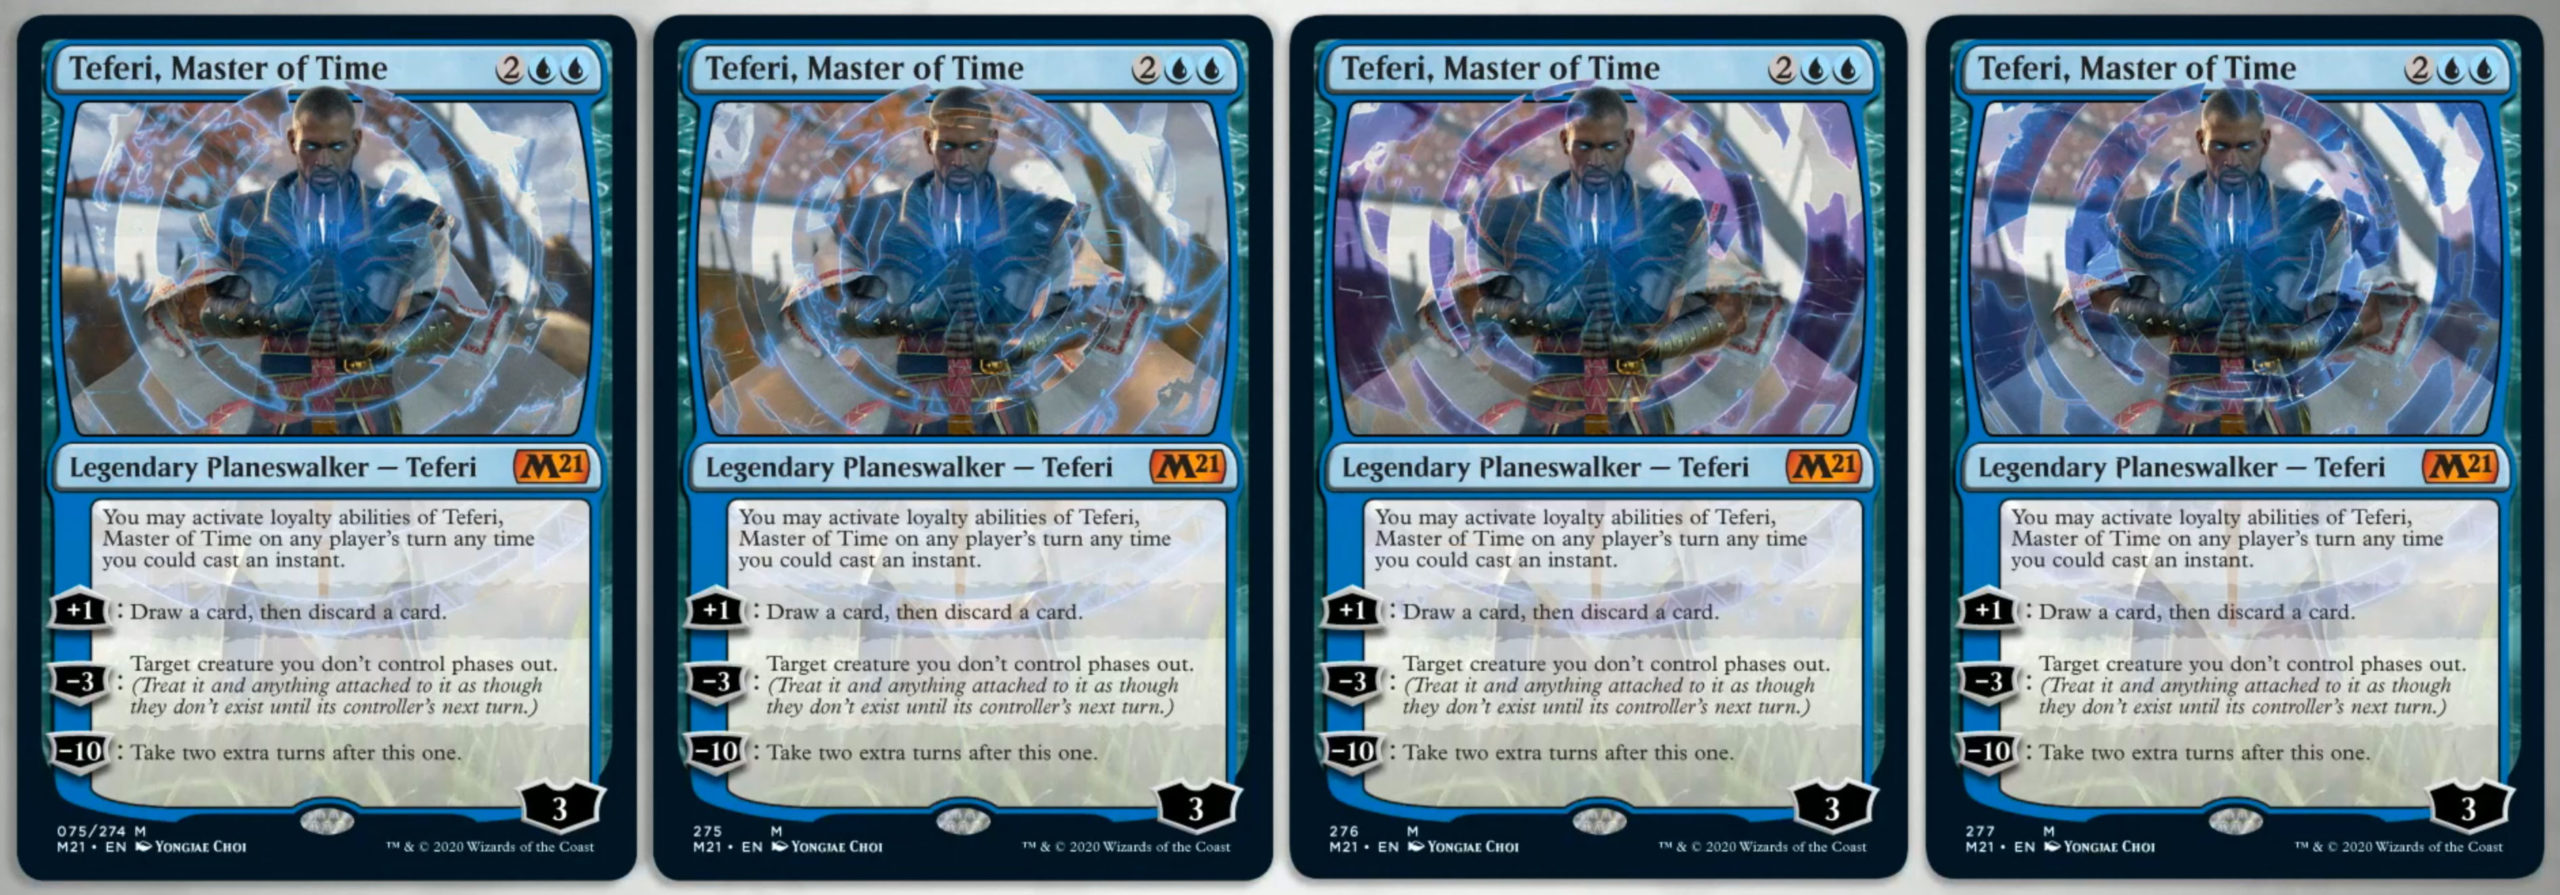 https://www.hipstersofthecoast.com/wp-content/uploads/2020/06/the-four-versionf-of-teferi-art-scaled.jpg